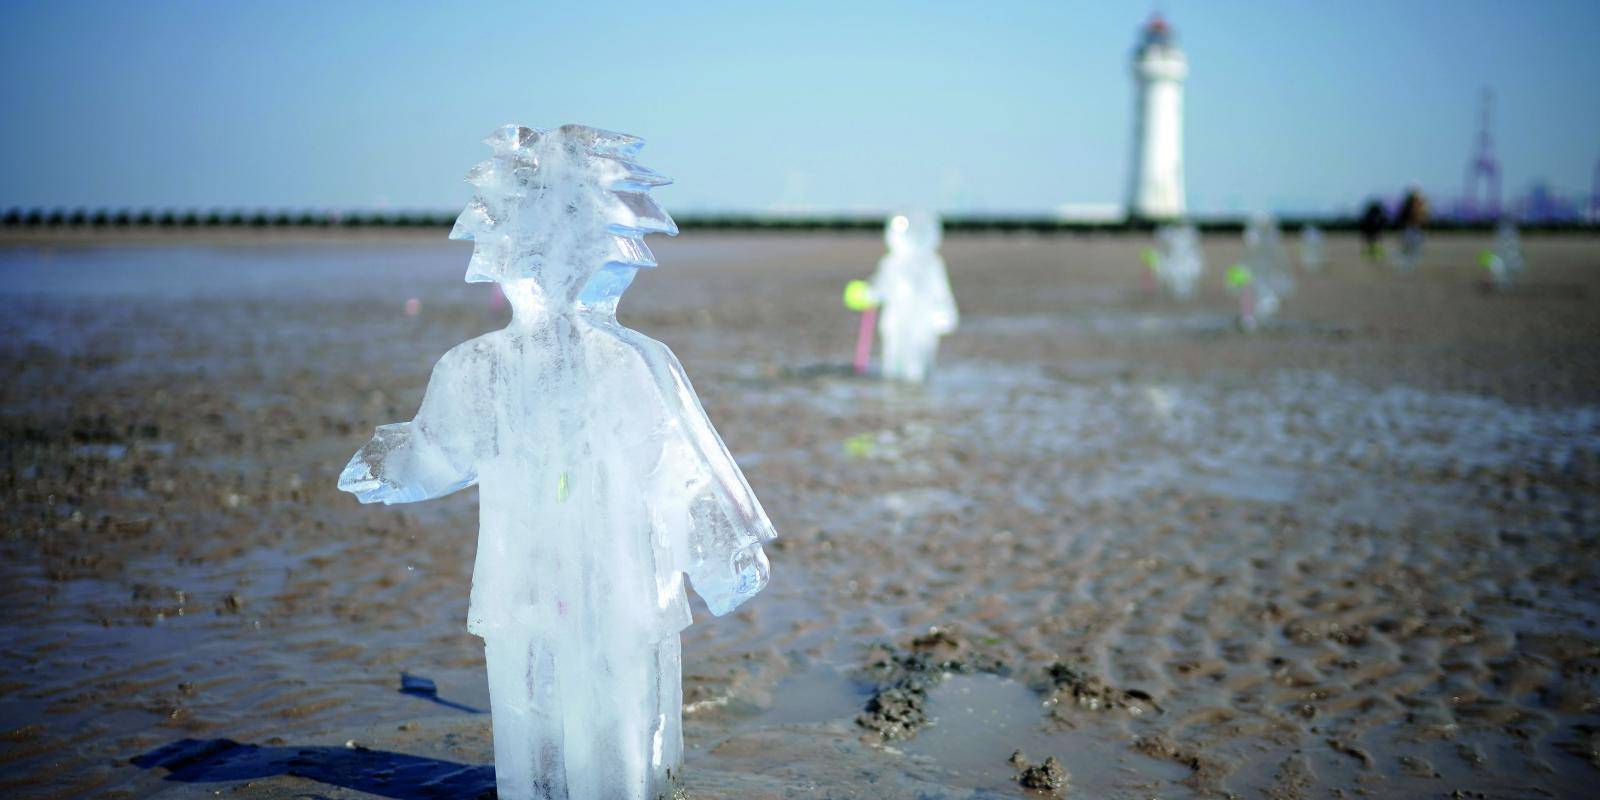 Ice sculptures of children installed on a beach to highlight the climate emergency